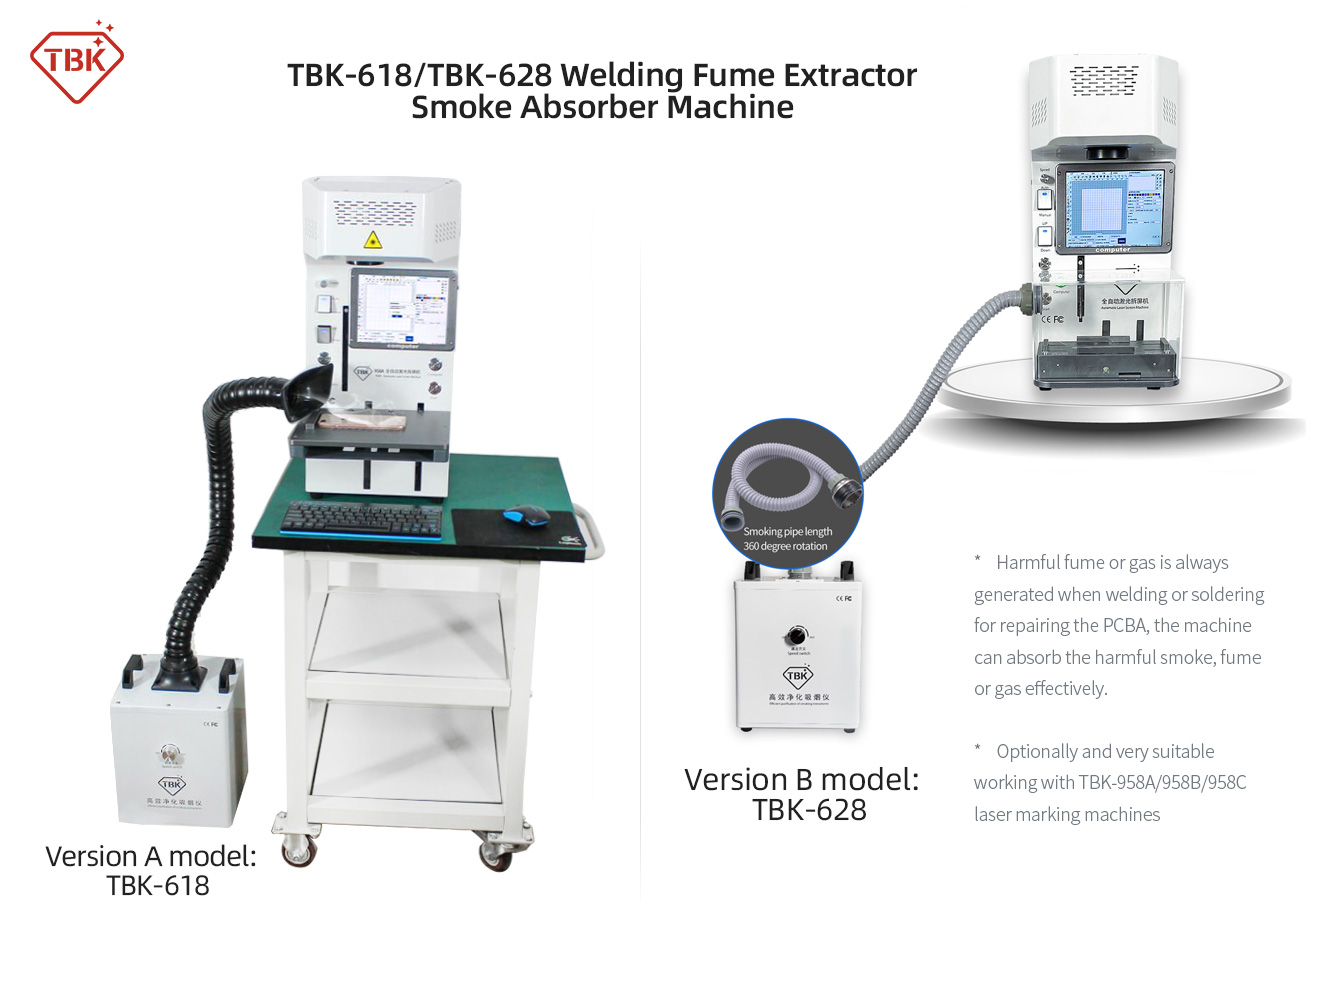 TBK-618/TBK-628 Welding Fume Extractor Smoke Absorber Machine Optional with Suction Box